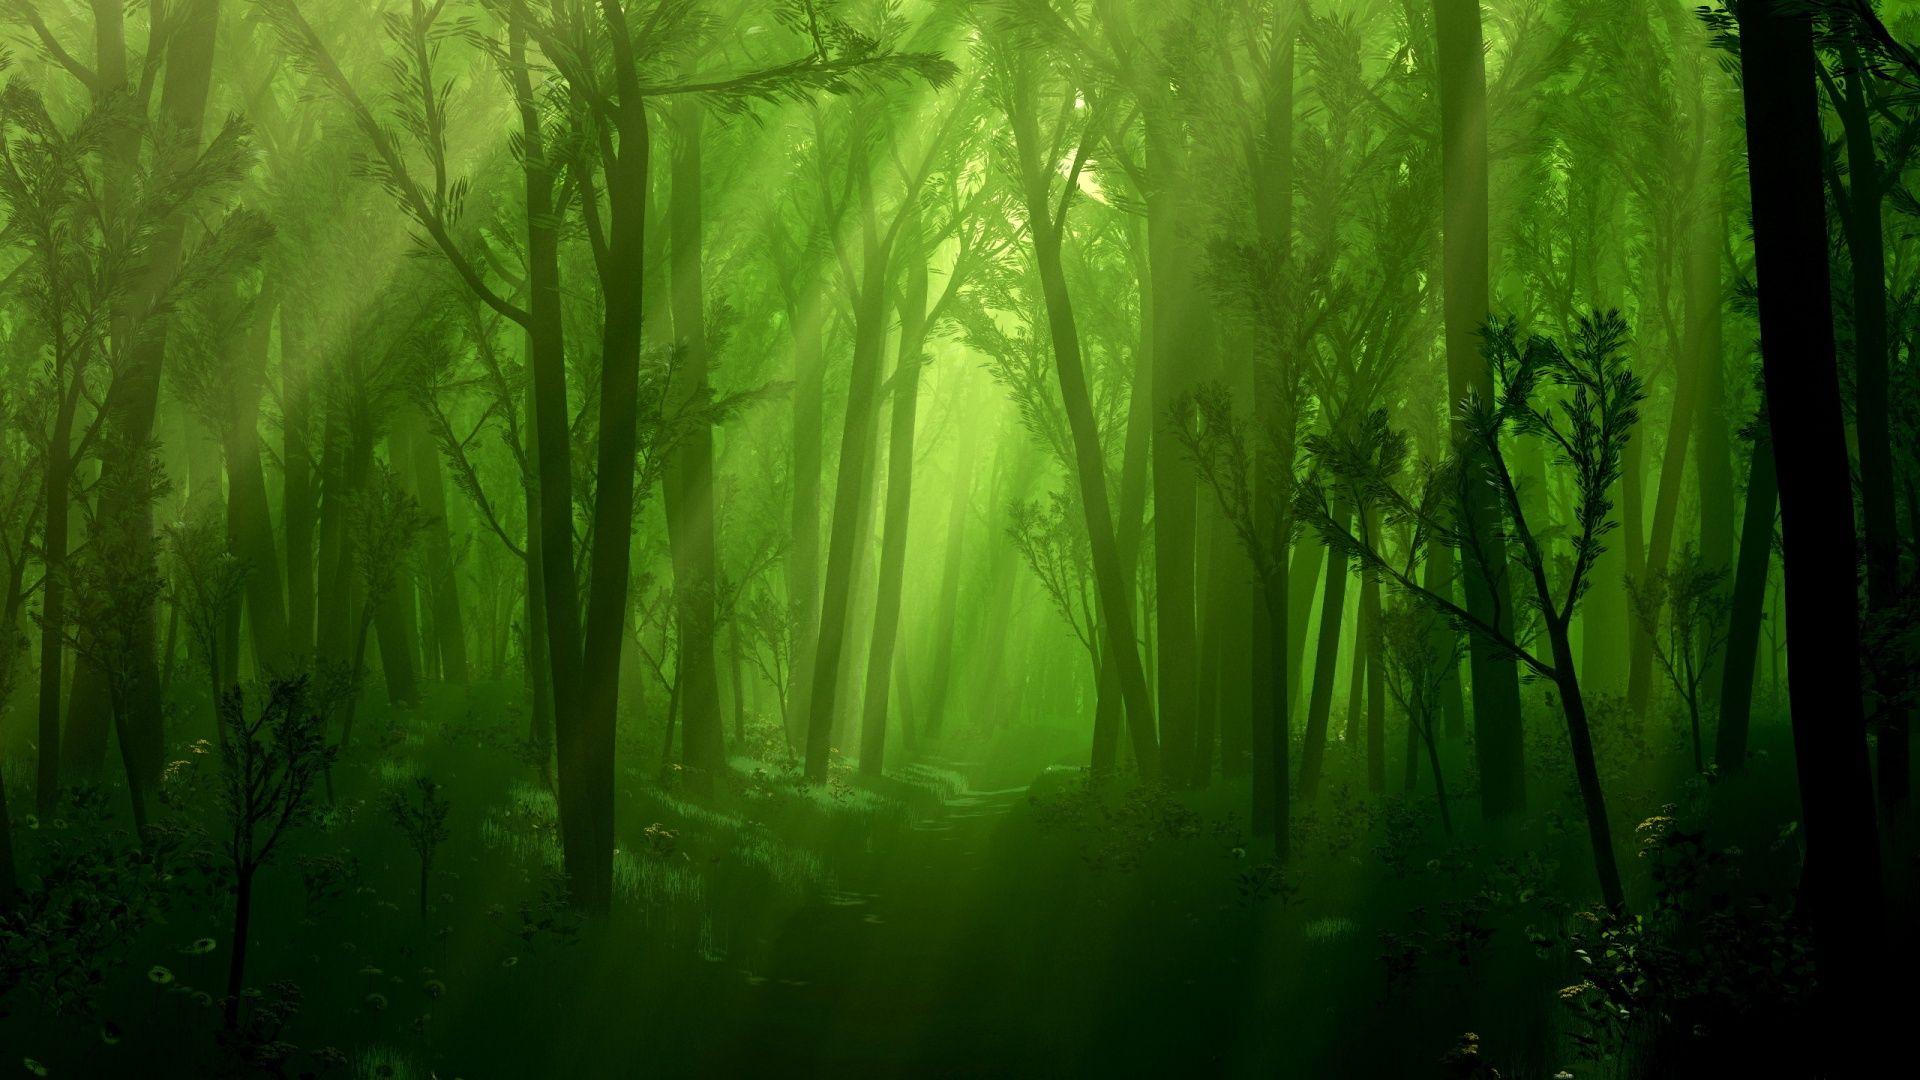 Wallpaper forest Images  Search Images on Everypixel